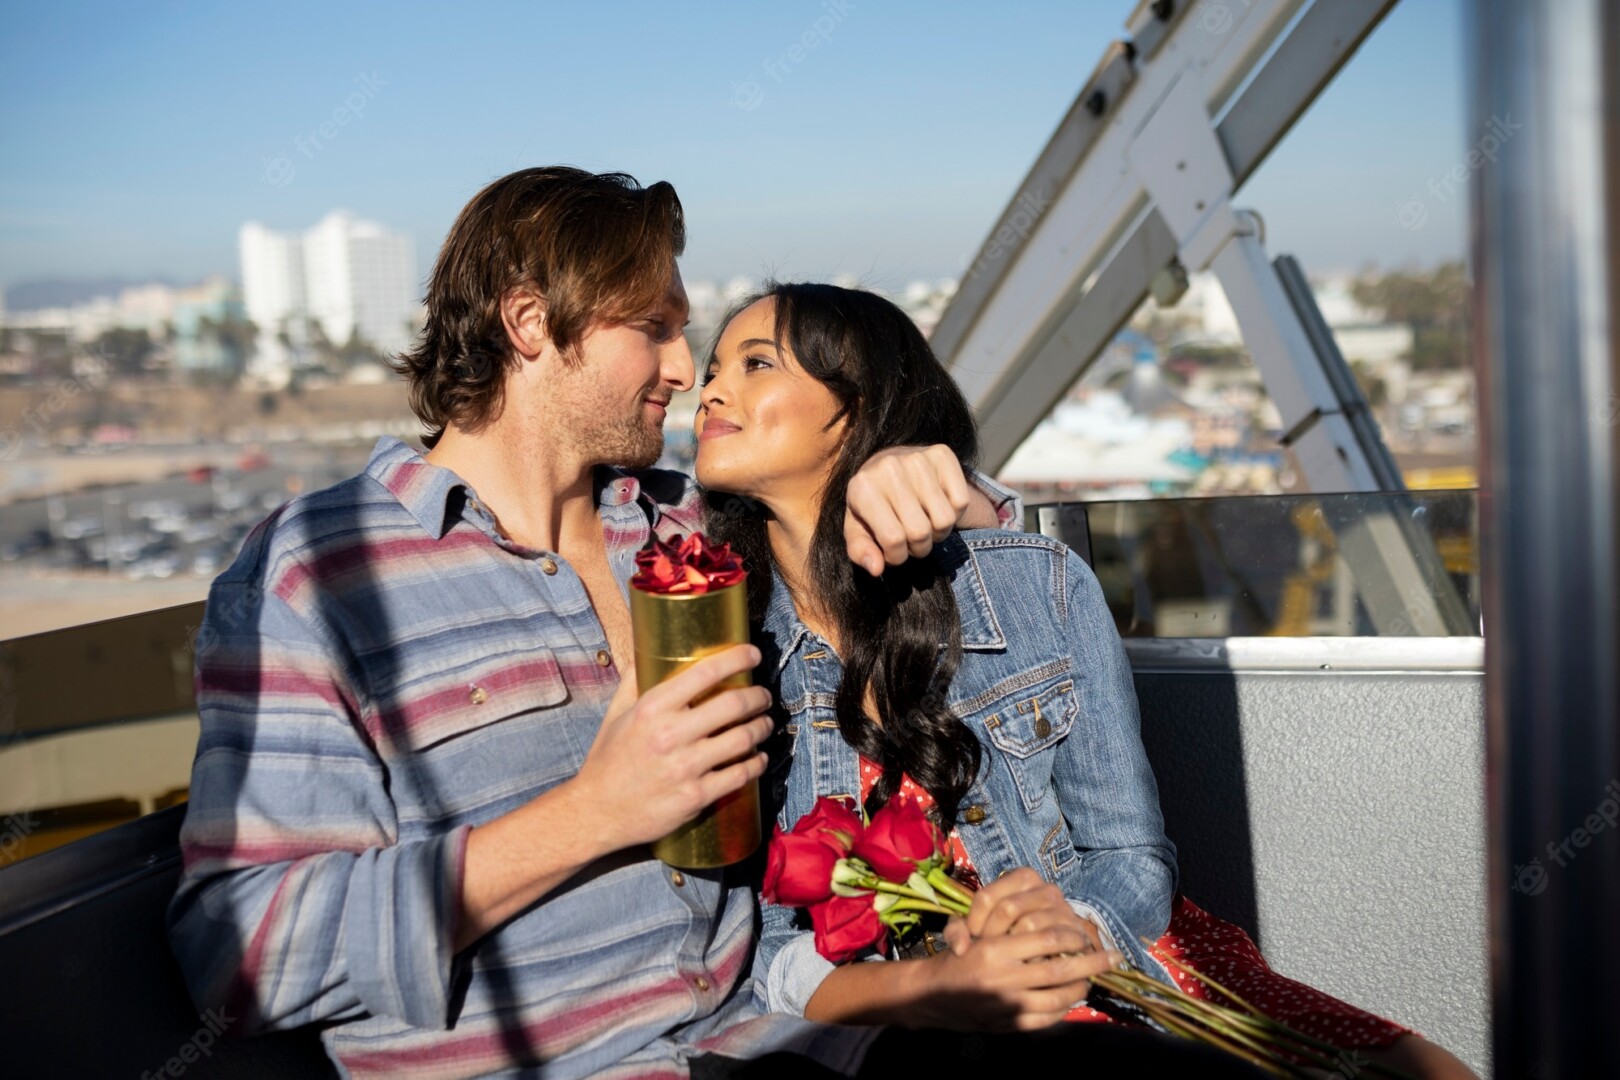 Young Couple Out Date Riding Ferris Wheel While Holding Roses Gift 23 2149274392